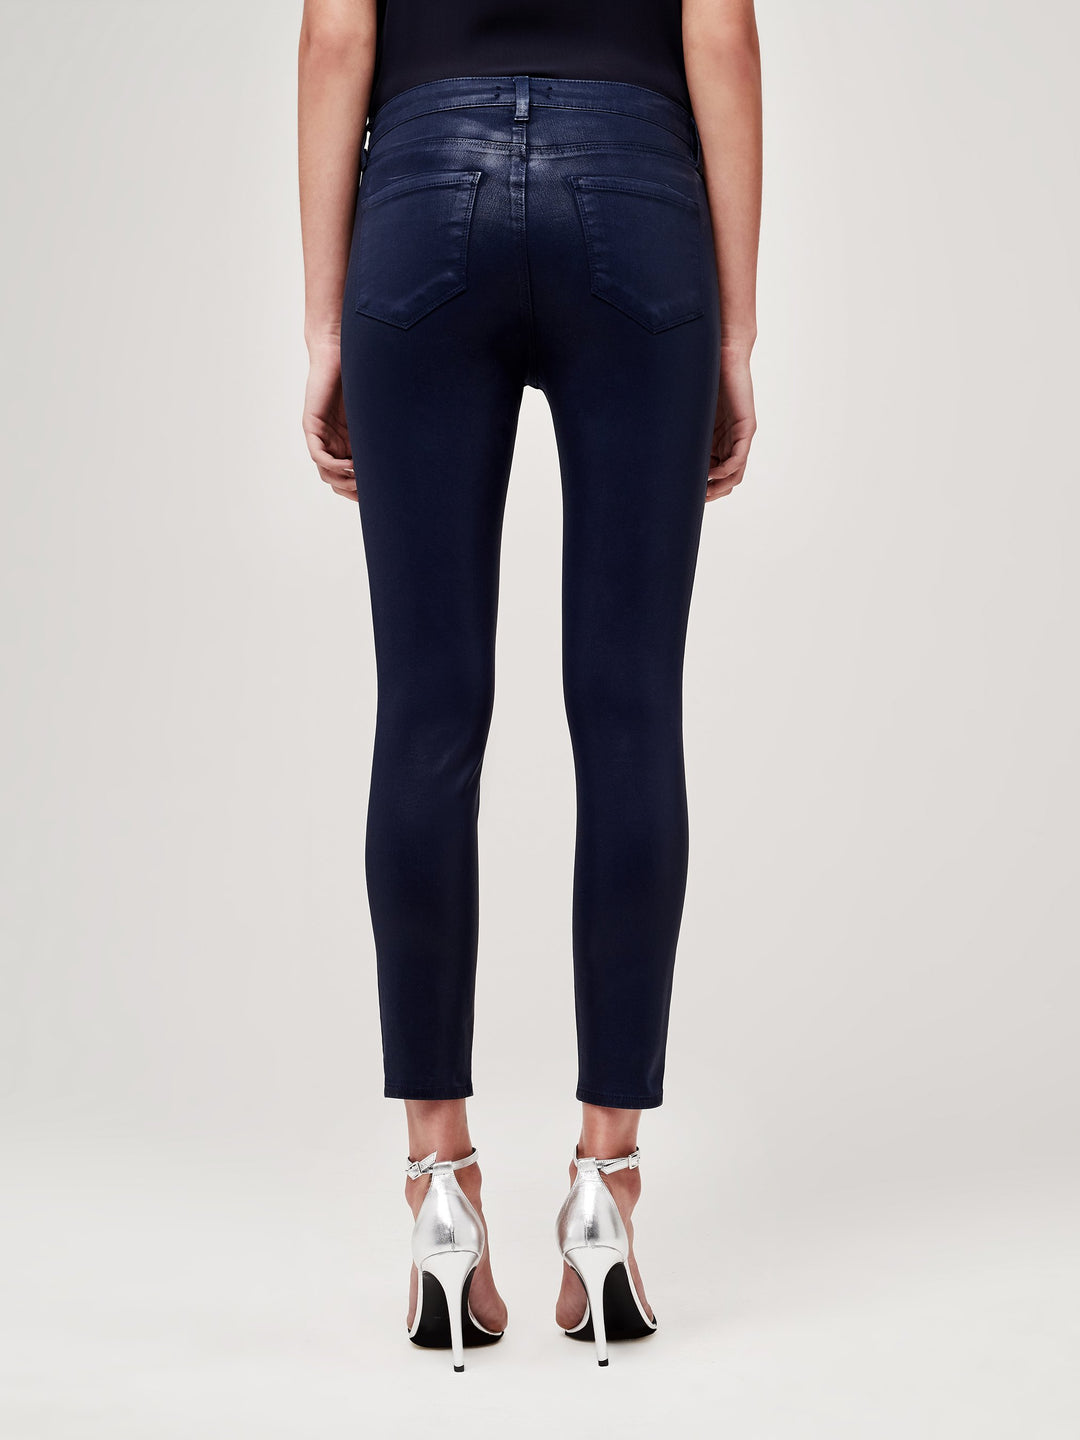 L'Agence Margot Coated High-Rise Skinny Ankle Jeans